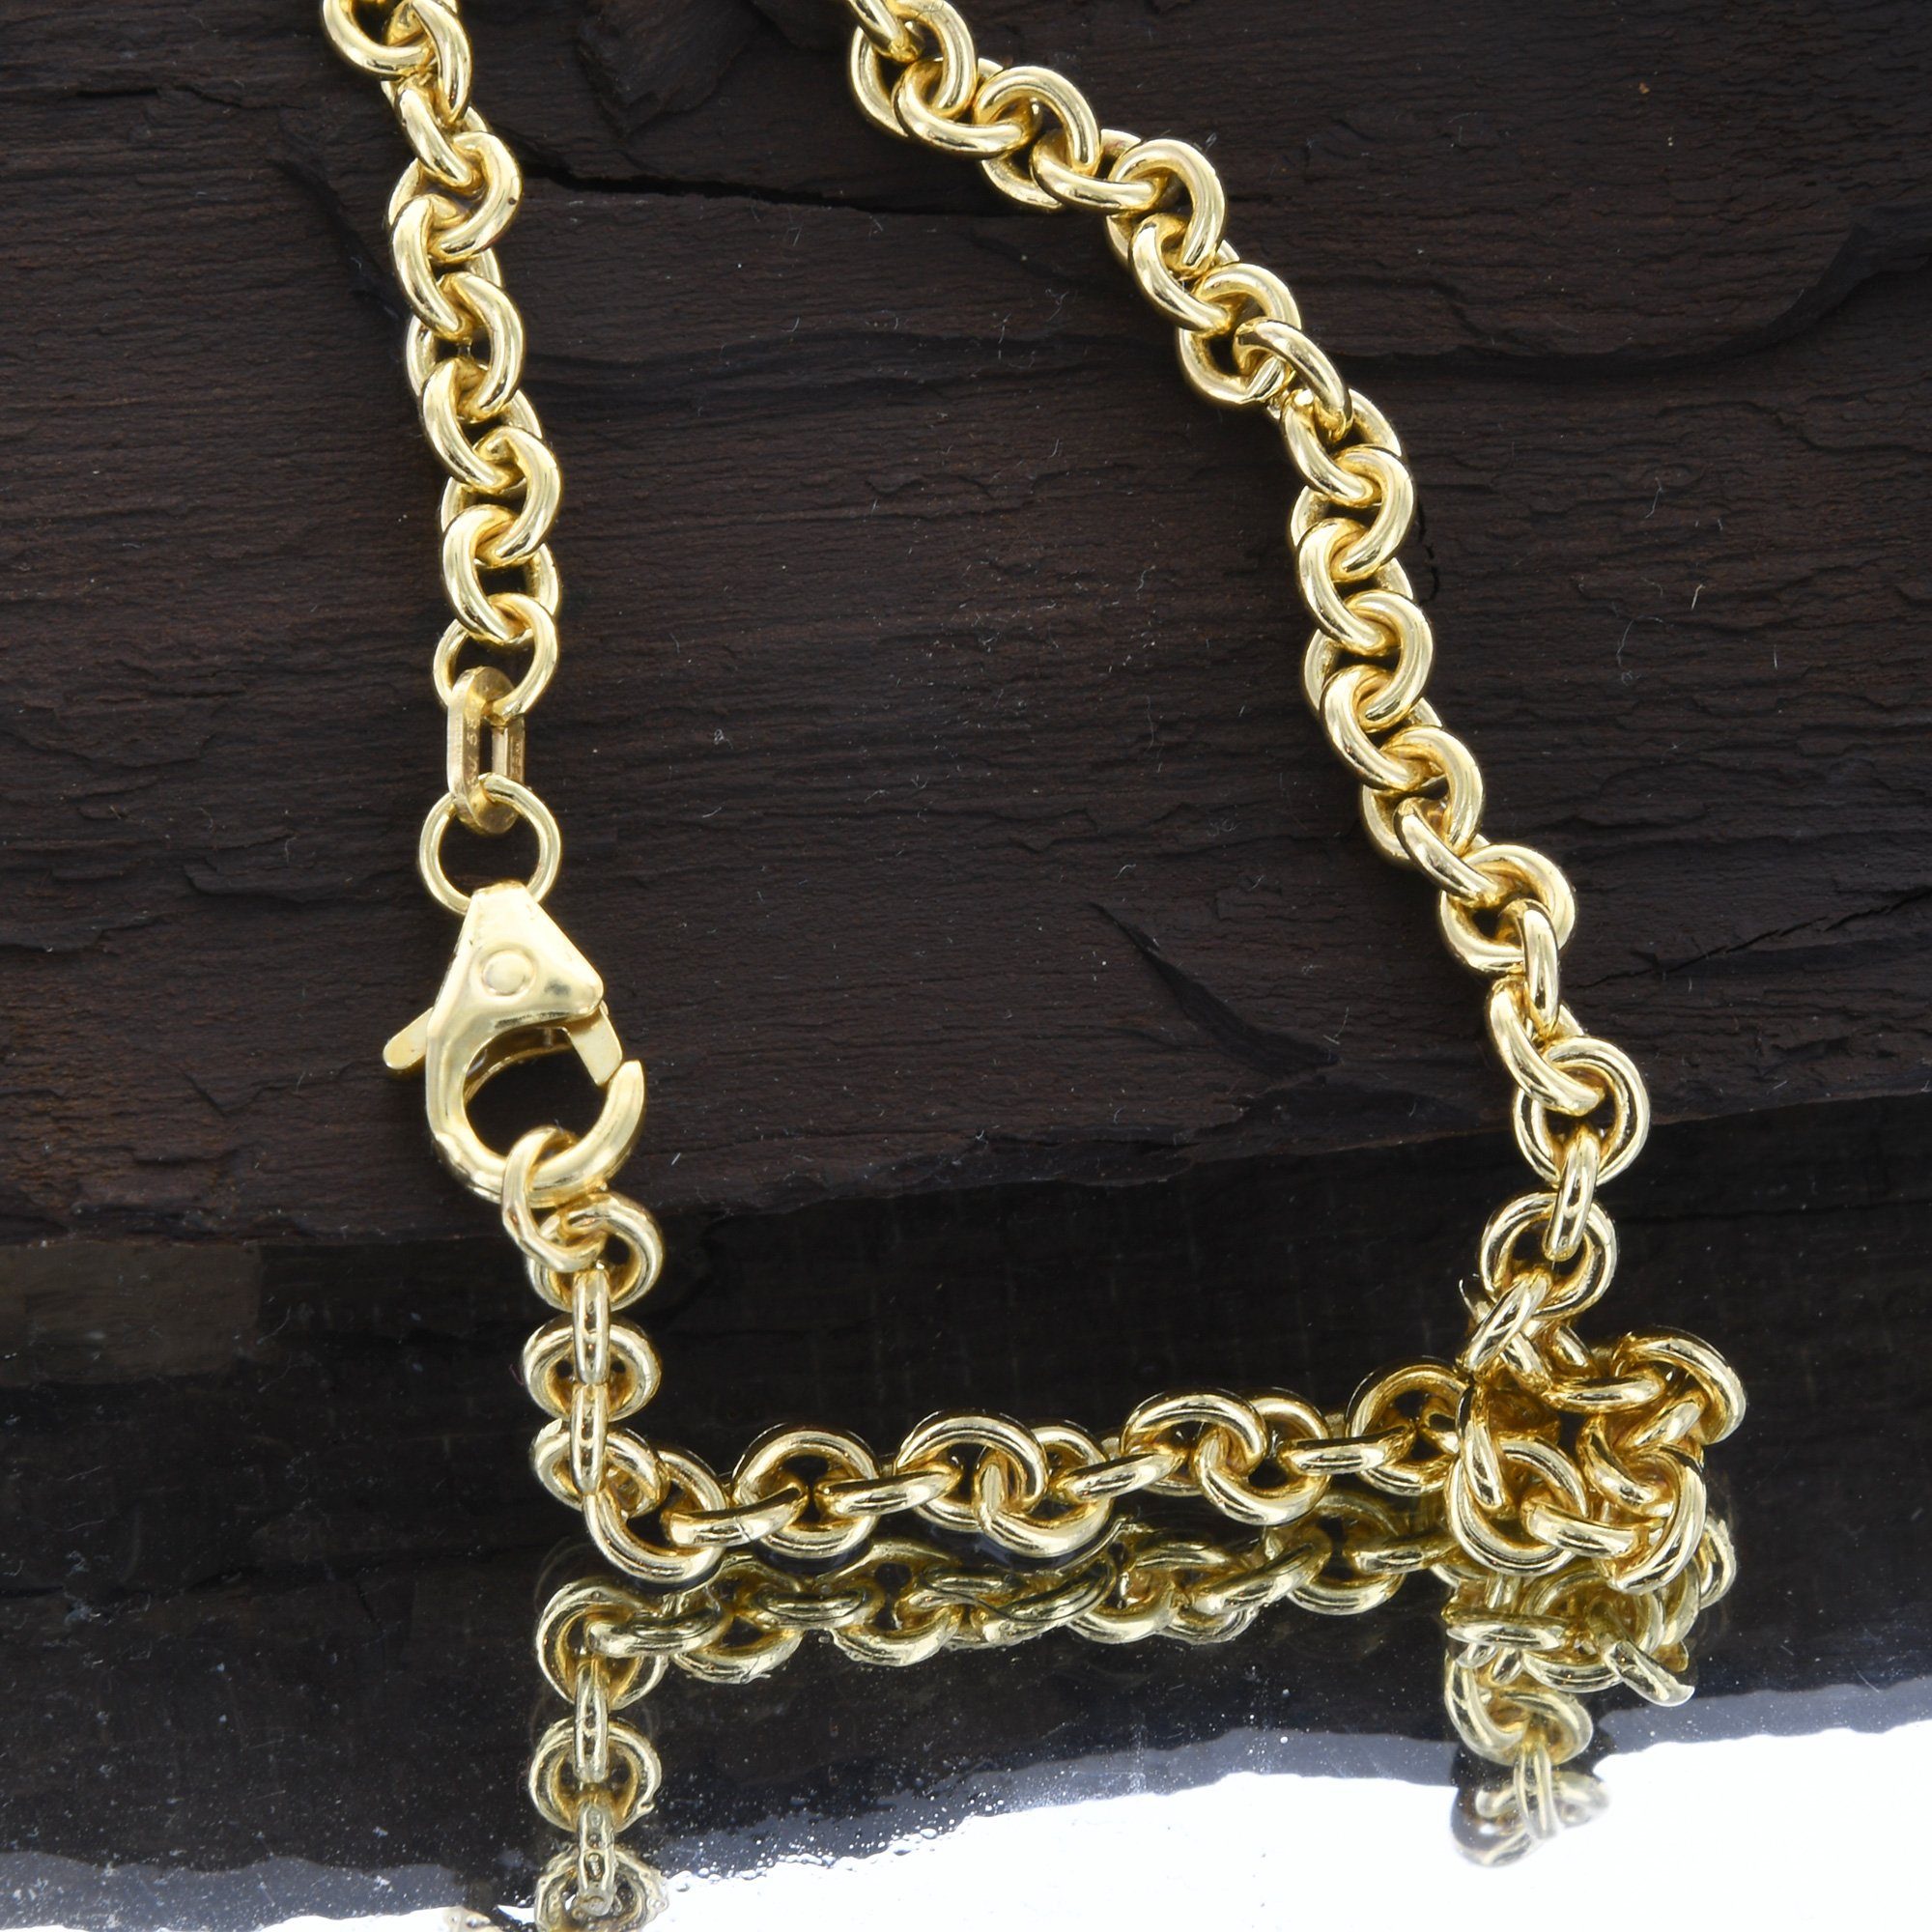 HOPLO Goldkette, Germany Made in